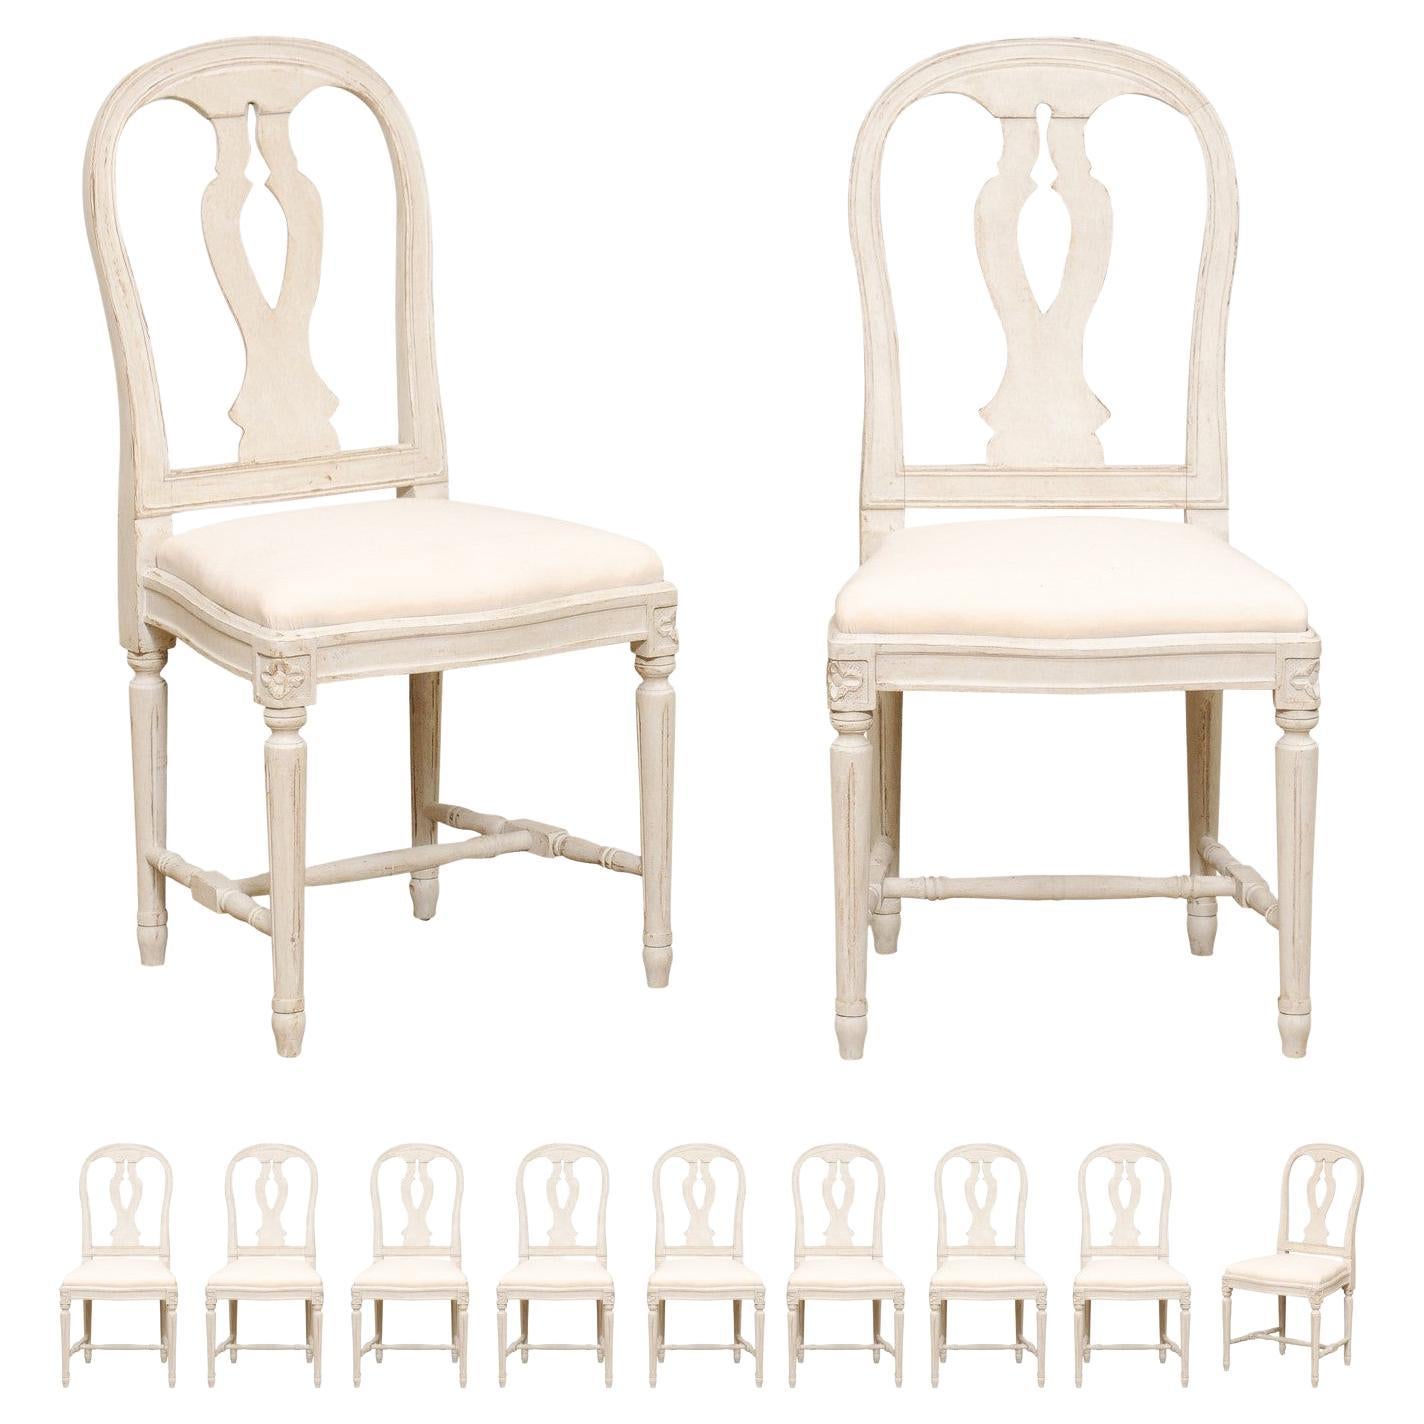 Set of 11 Swedish Painted Dining Room Chairs with Carved Splats and Upholstery